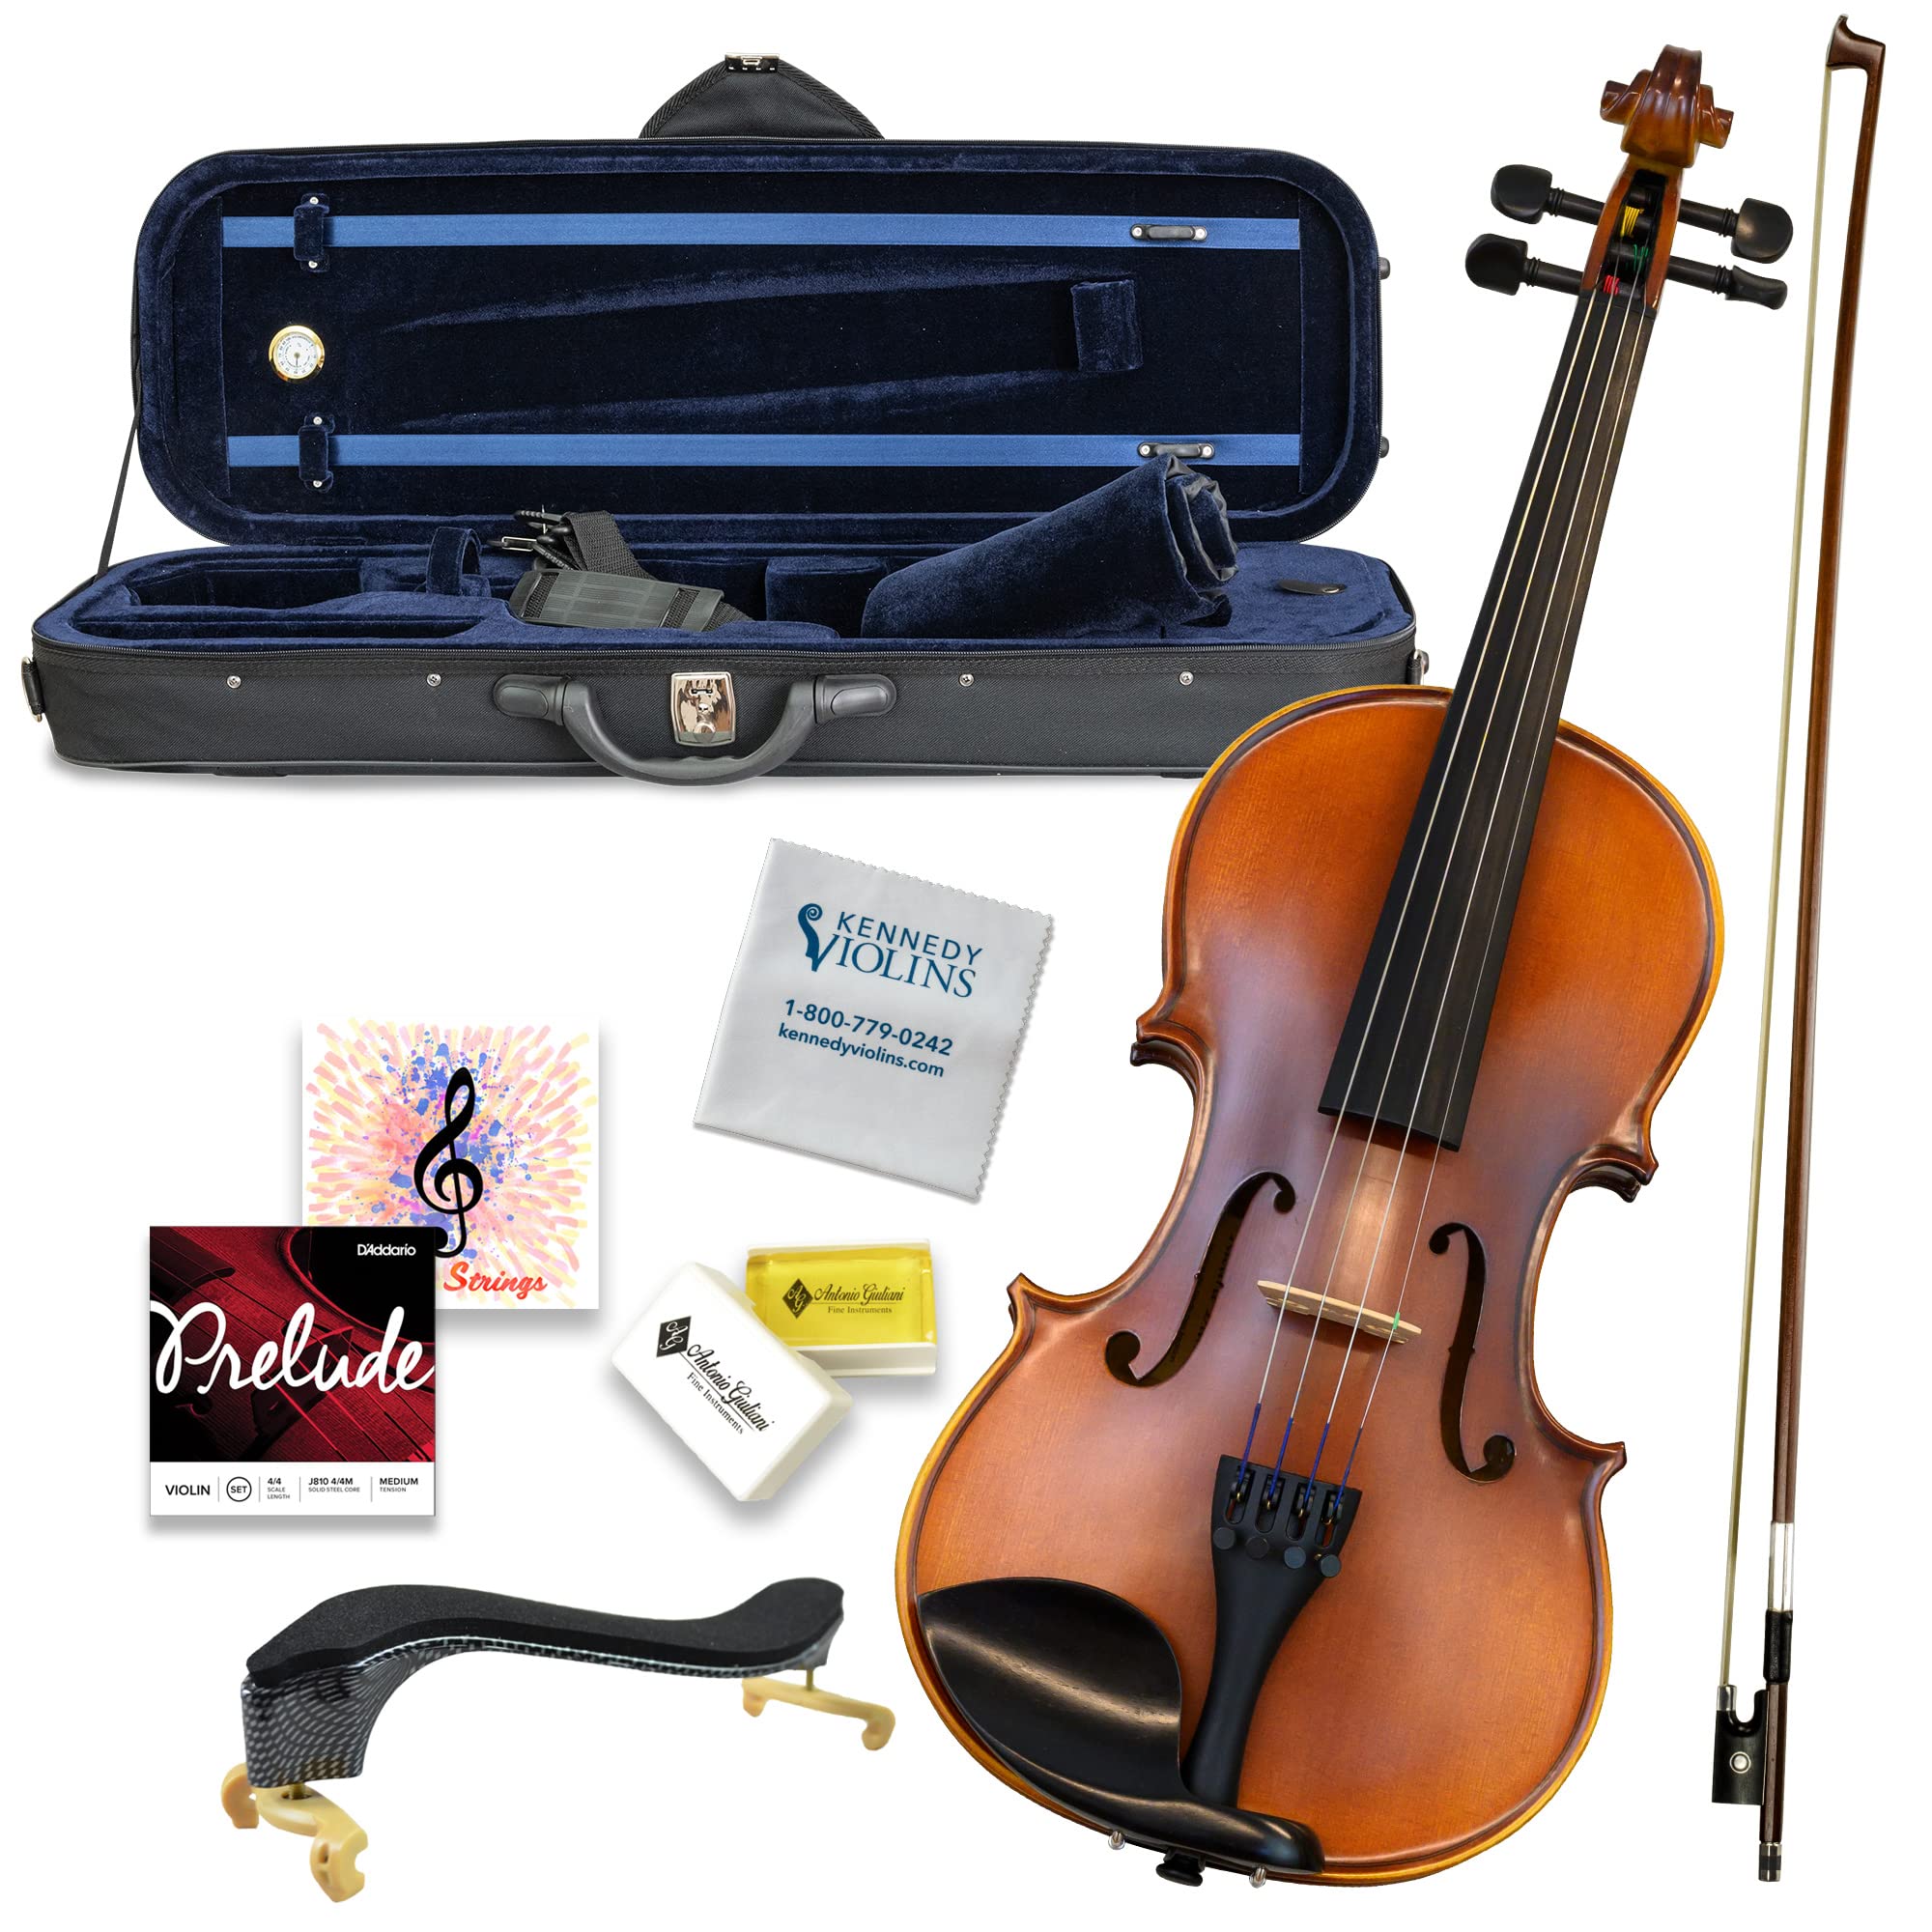 Kennedy Violins Bunnel Premier Violin Outfit 34 Size - carrying case and Accessories Included - Solid Maple Wood and Ebony Fittings By Kennedy V